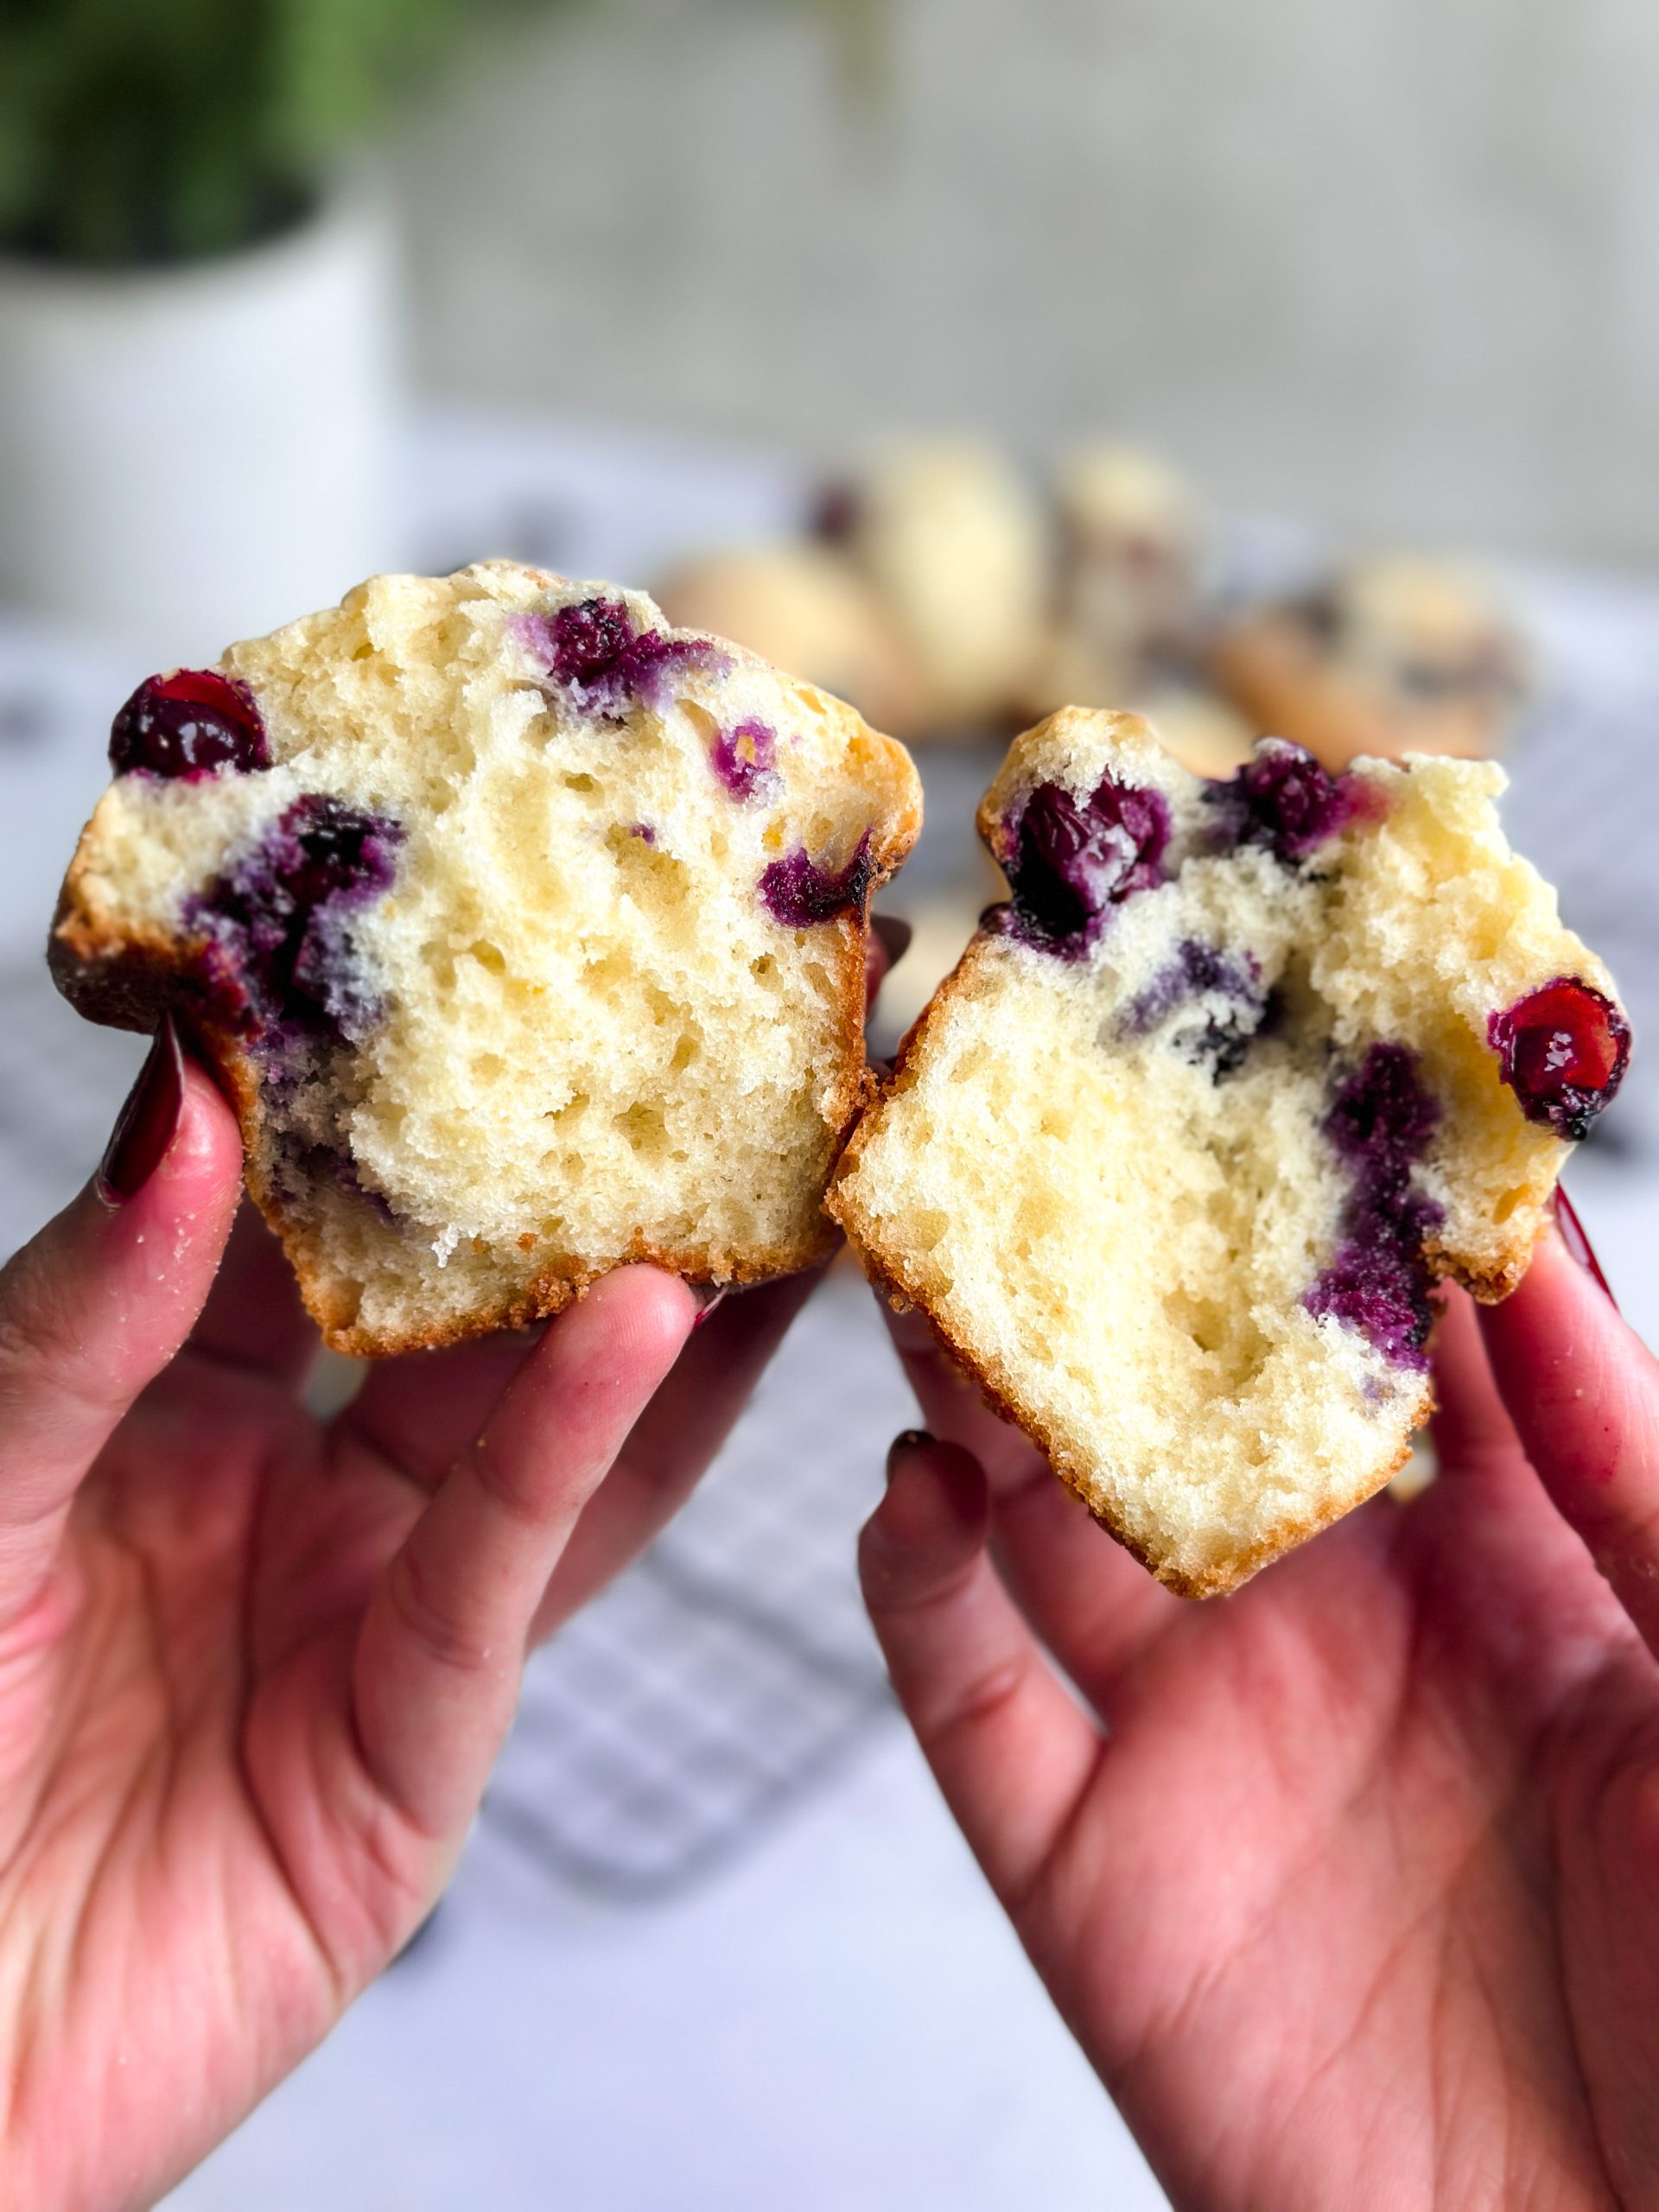 Hands tearing apart a blueberry muffins in 2 halves revealing bursting blueberries inside